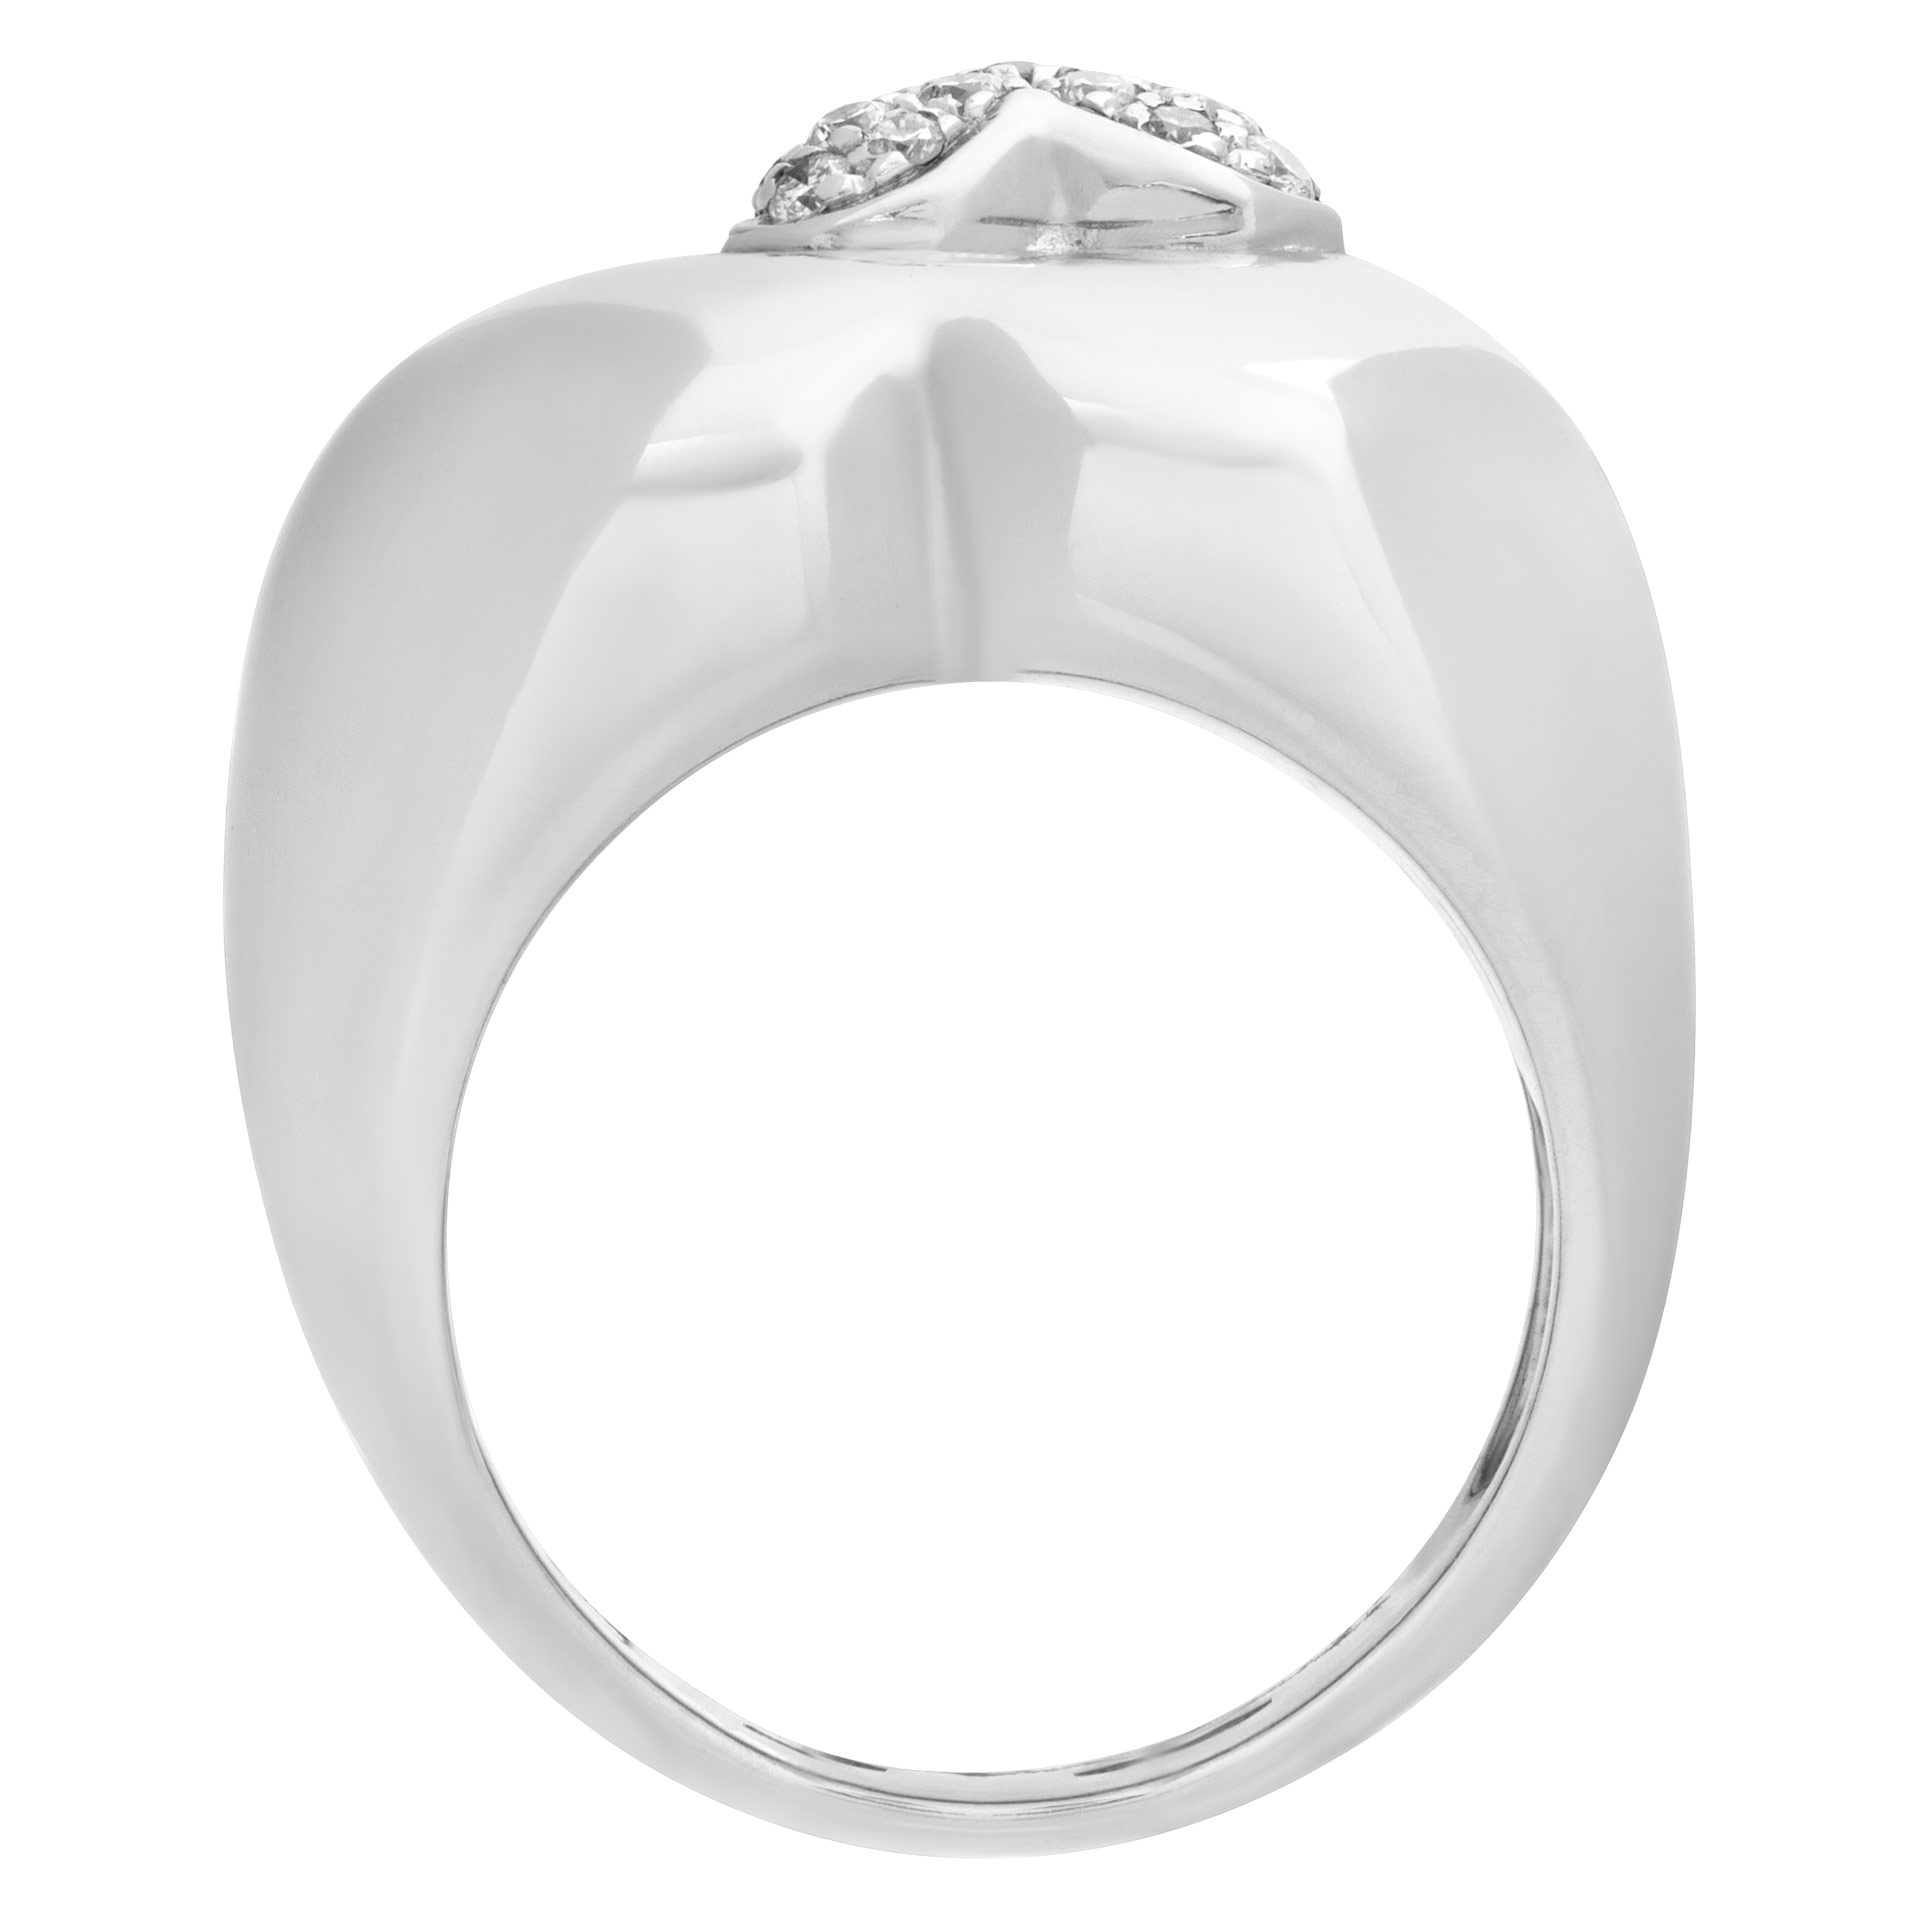 Pave diamond heart shaped ring in 18k white gold. Size 7 image 6